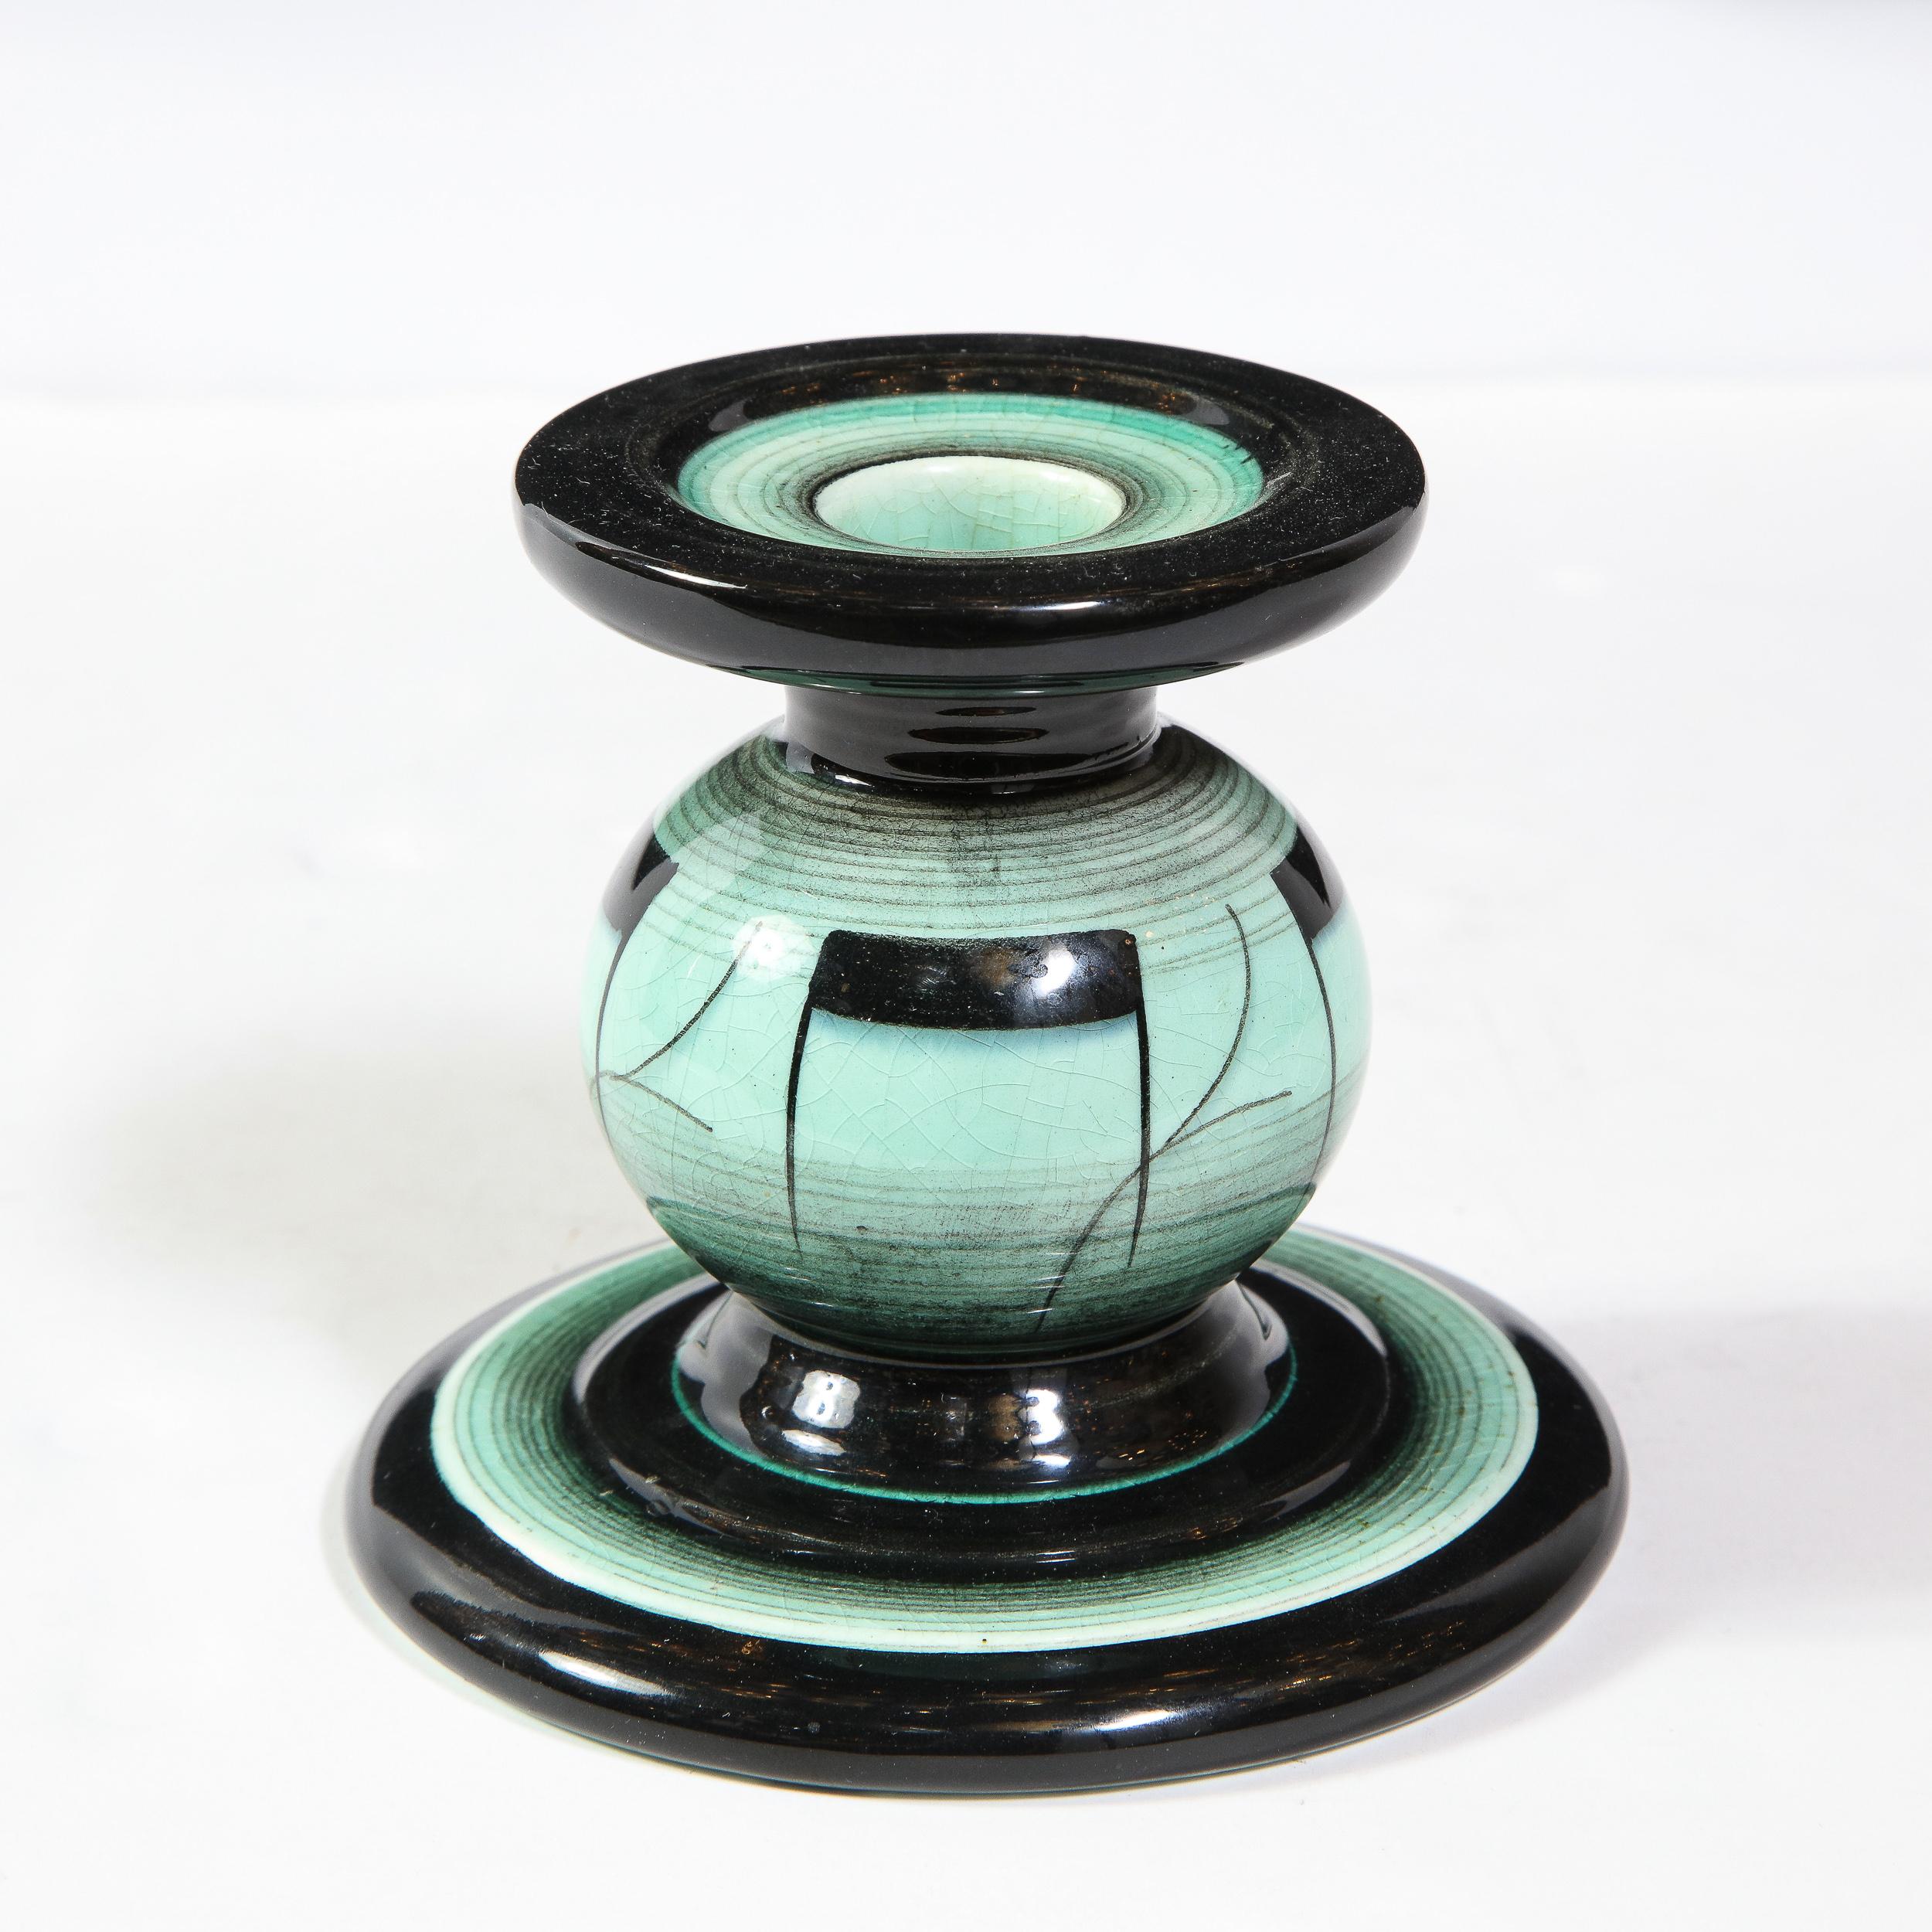 This refined Art Deco glazed ceramic candle was designed by Ilse Claesson for Rörstrand in Sweden, circa 1930. It features a stylized hour glass form with a striated onyx glazed base and a sea foam center with abstract hand painted motifs, as well